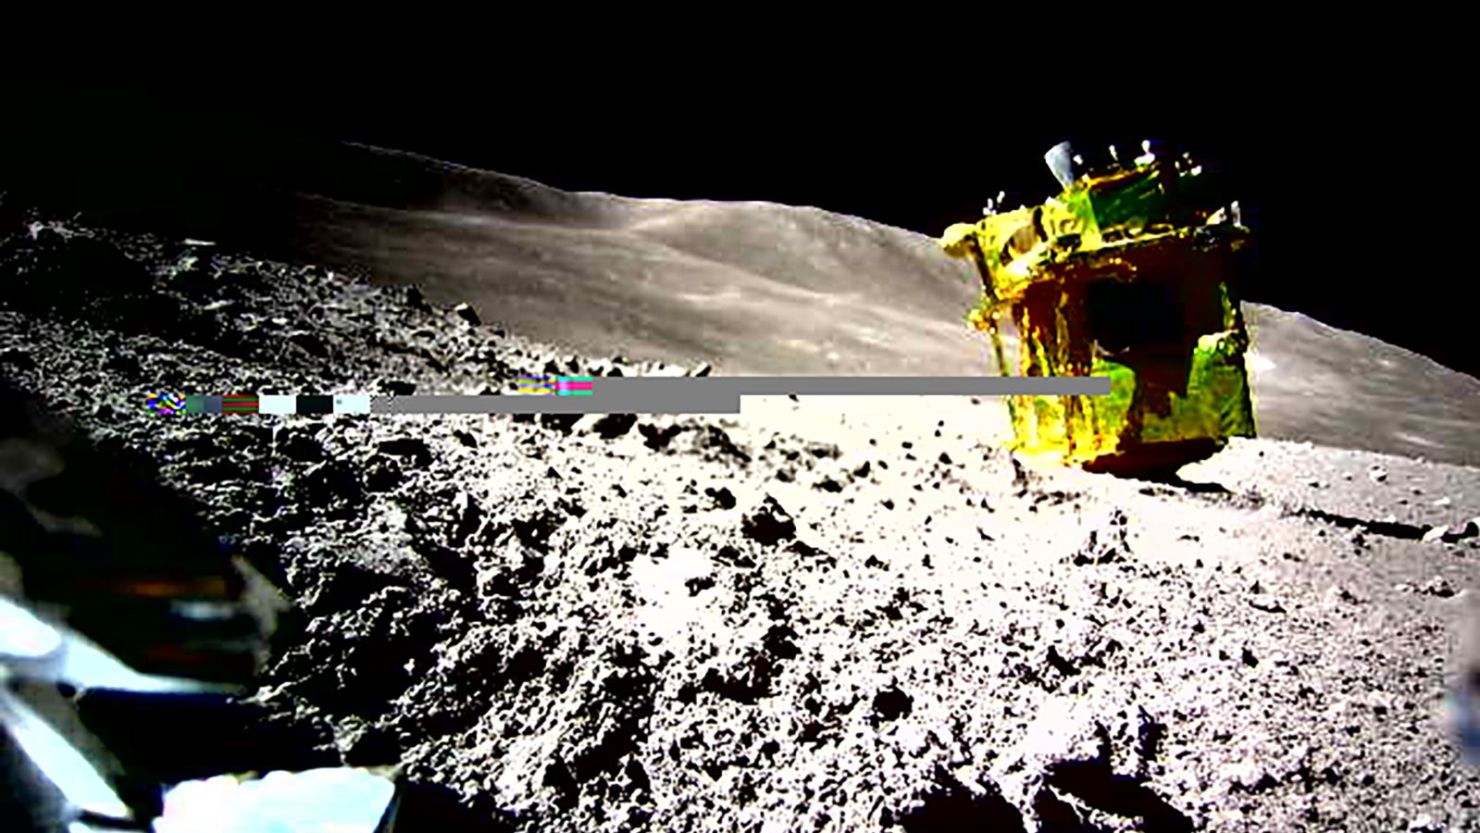 An image taken by the Lunar Excursion Vehicle 2, a miniature rover that accompanied Moon Sniper on its journey, shows the sideways orientation of the spacecraft on the lunar surface.